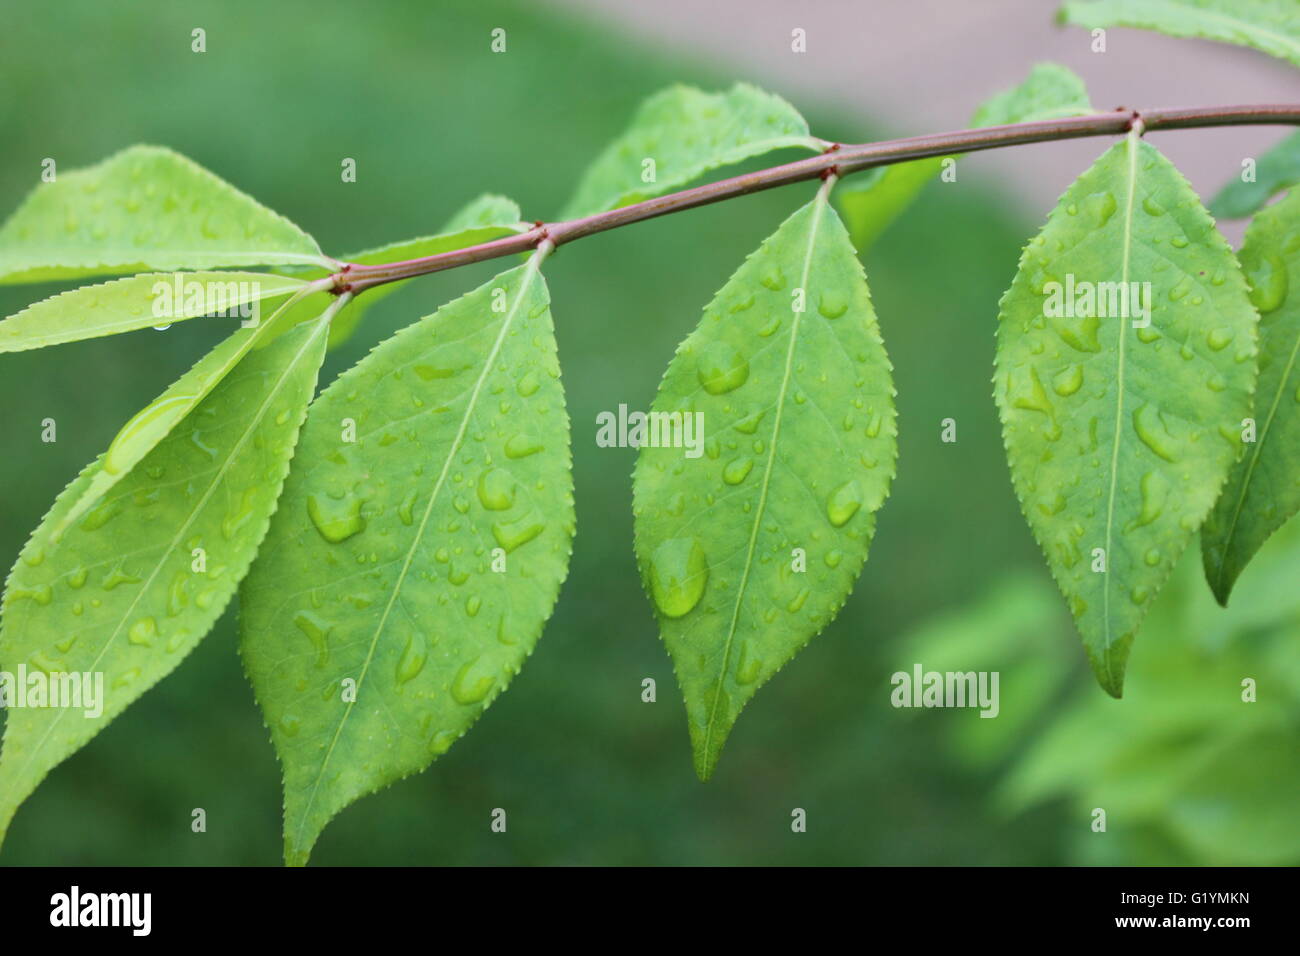 Green leaves with water droplets Stock Photo